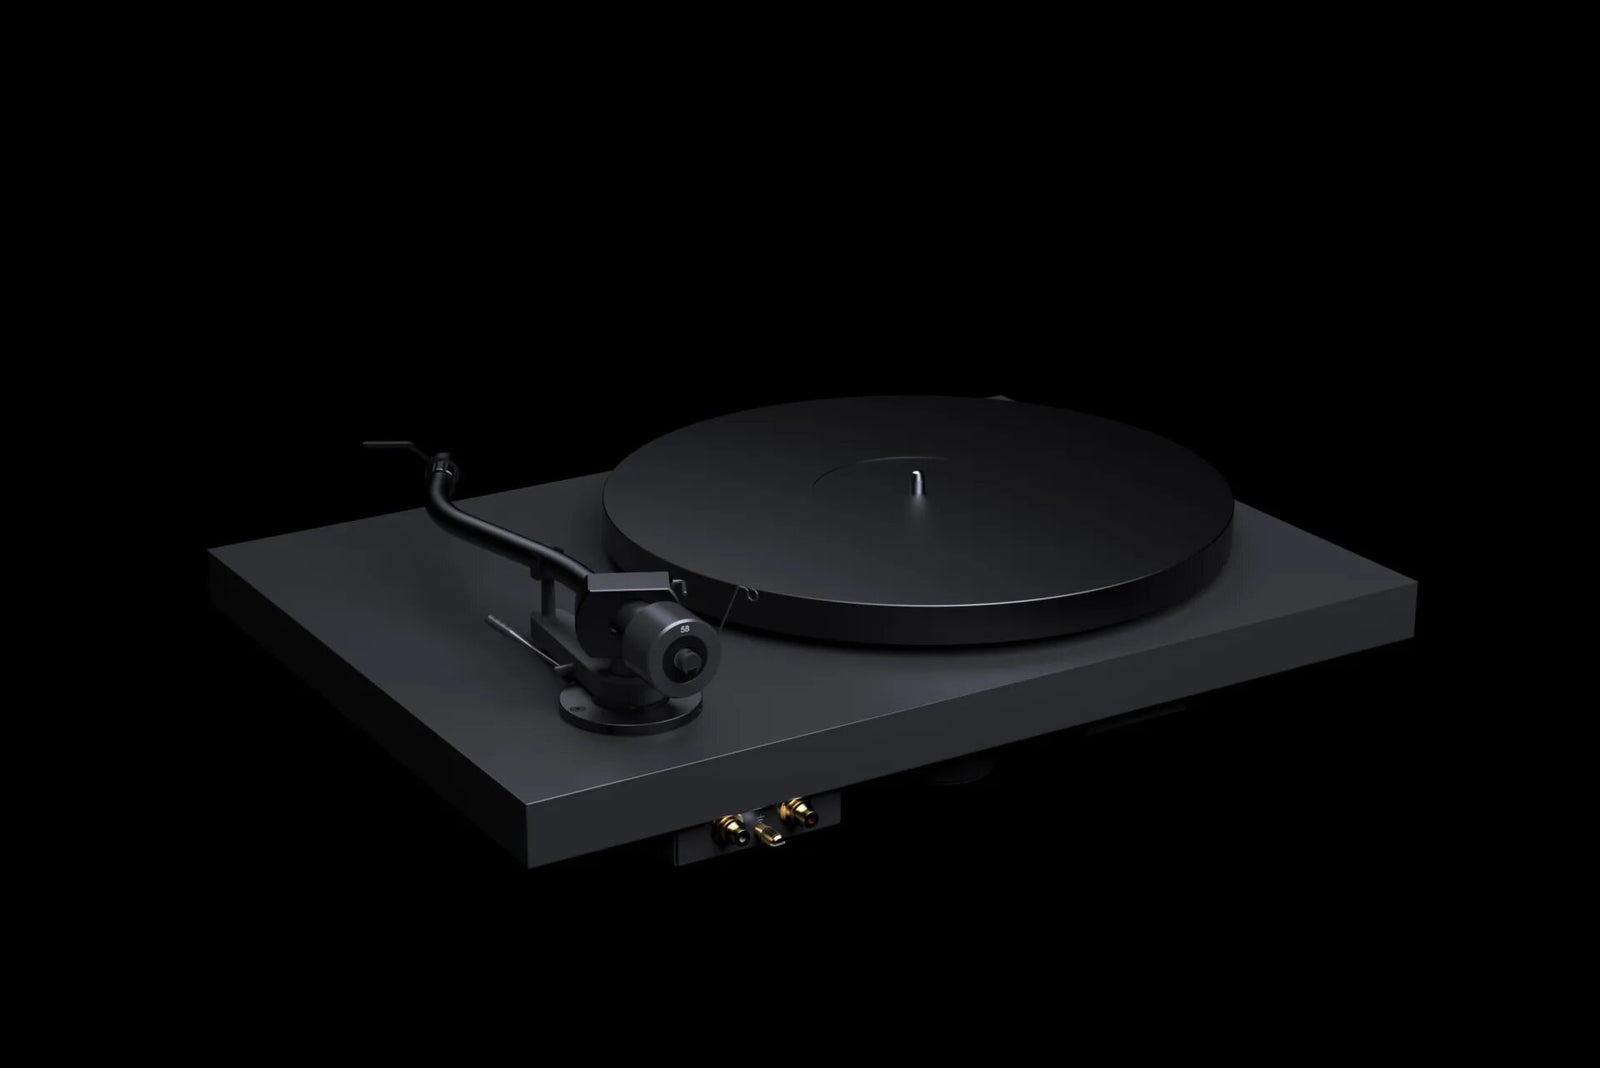 The Project Debut PRO S takes this philosophy to the extreme. The Pro-ject Debut Pro S is available at Vinyl Sound. Get the best price on all Project Audio: Pro-ject DEBUT PRO S Turntables X1 - X8 - X2 – Pro-ject 6 PerspeX SB - RPM 1 Carbon - RPM 10 Carbon – Xtension 12 Evolution... Pro-ject HiFi Electronics Phono Preamplifier · Vinyl Recording · Pro-ject Preamplifier – Pro-ject Phono Box...